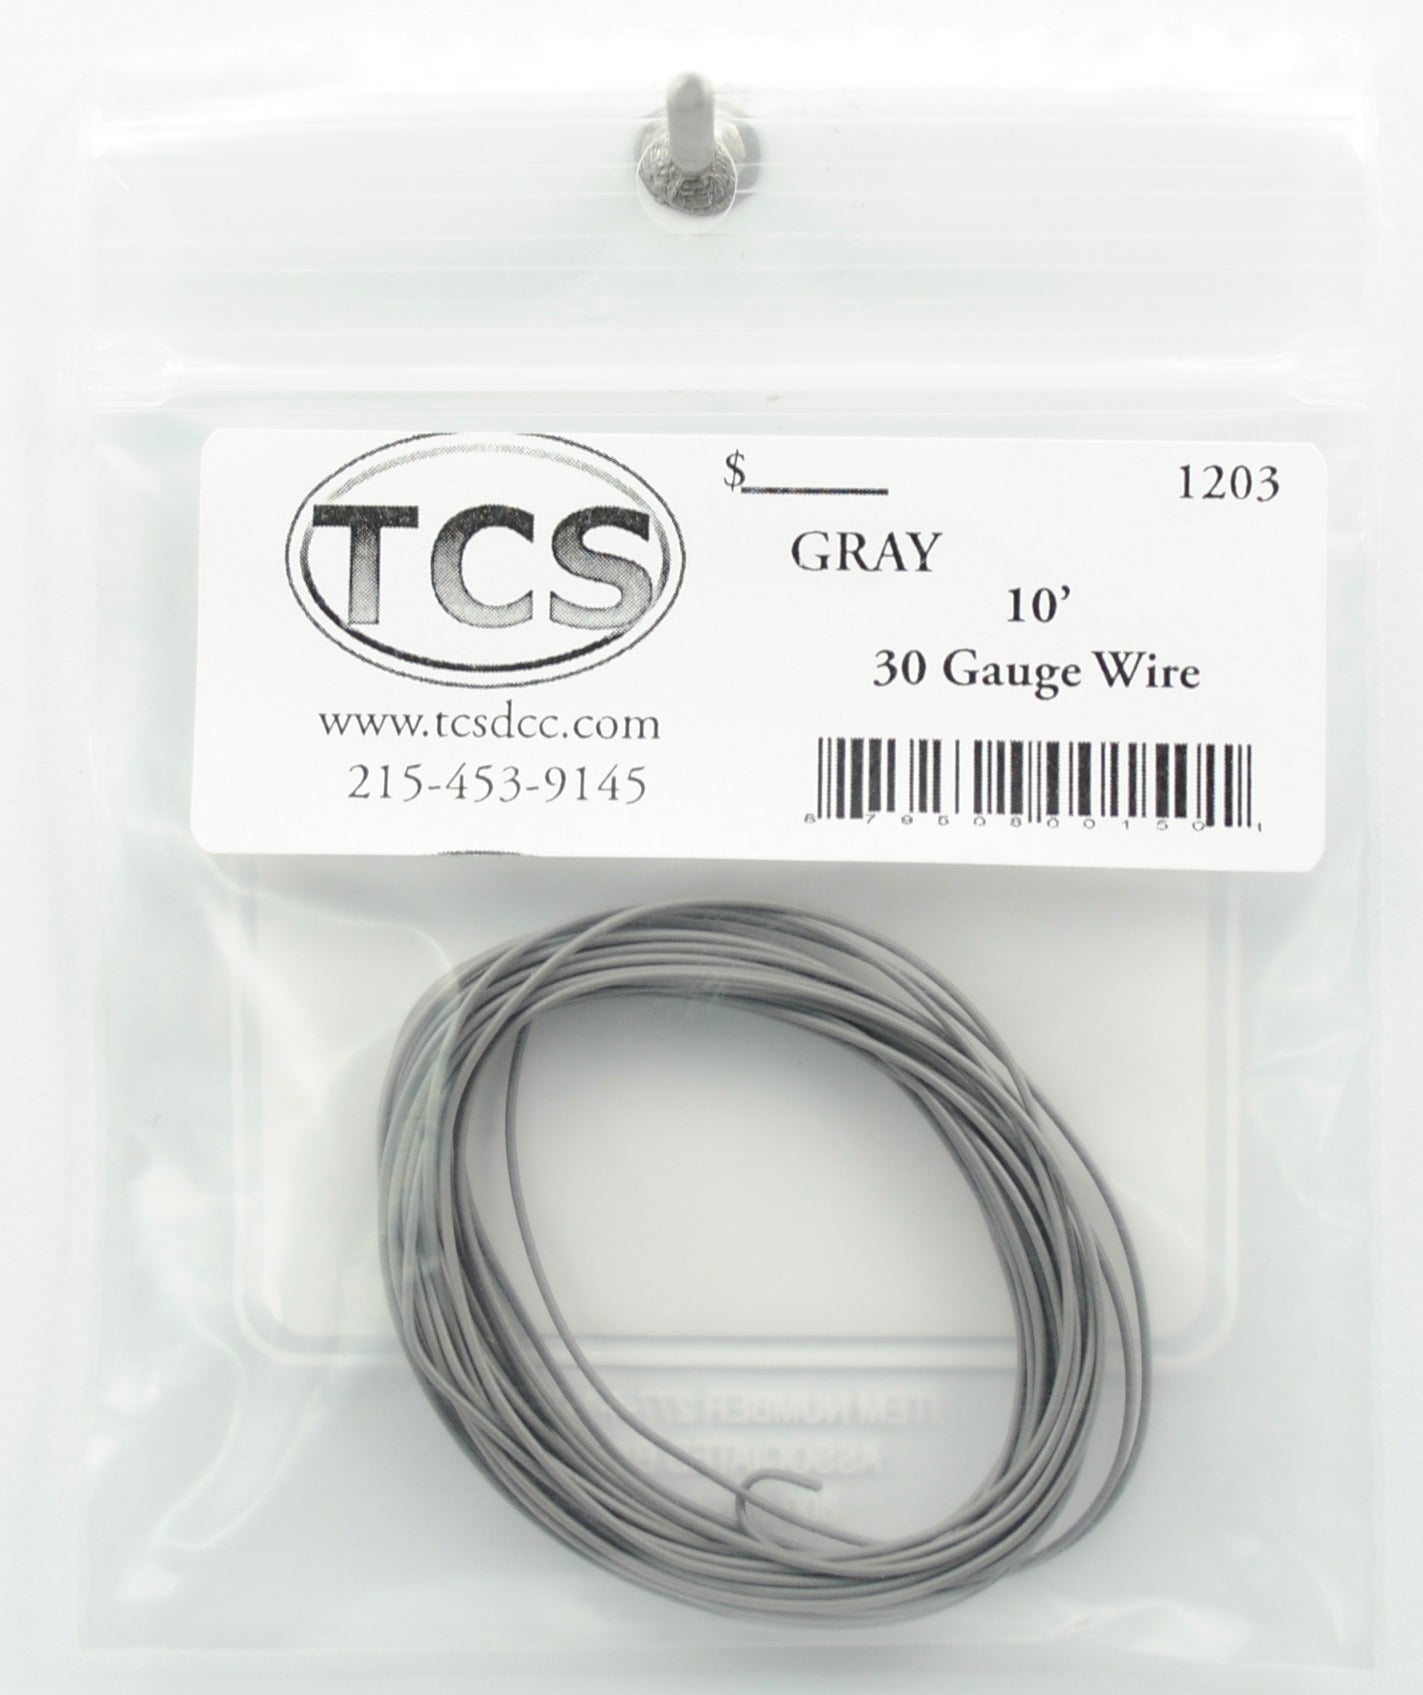 Train Control Systems 1203 30 Gauge Gray Wire - 10'